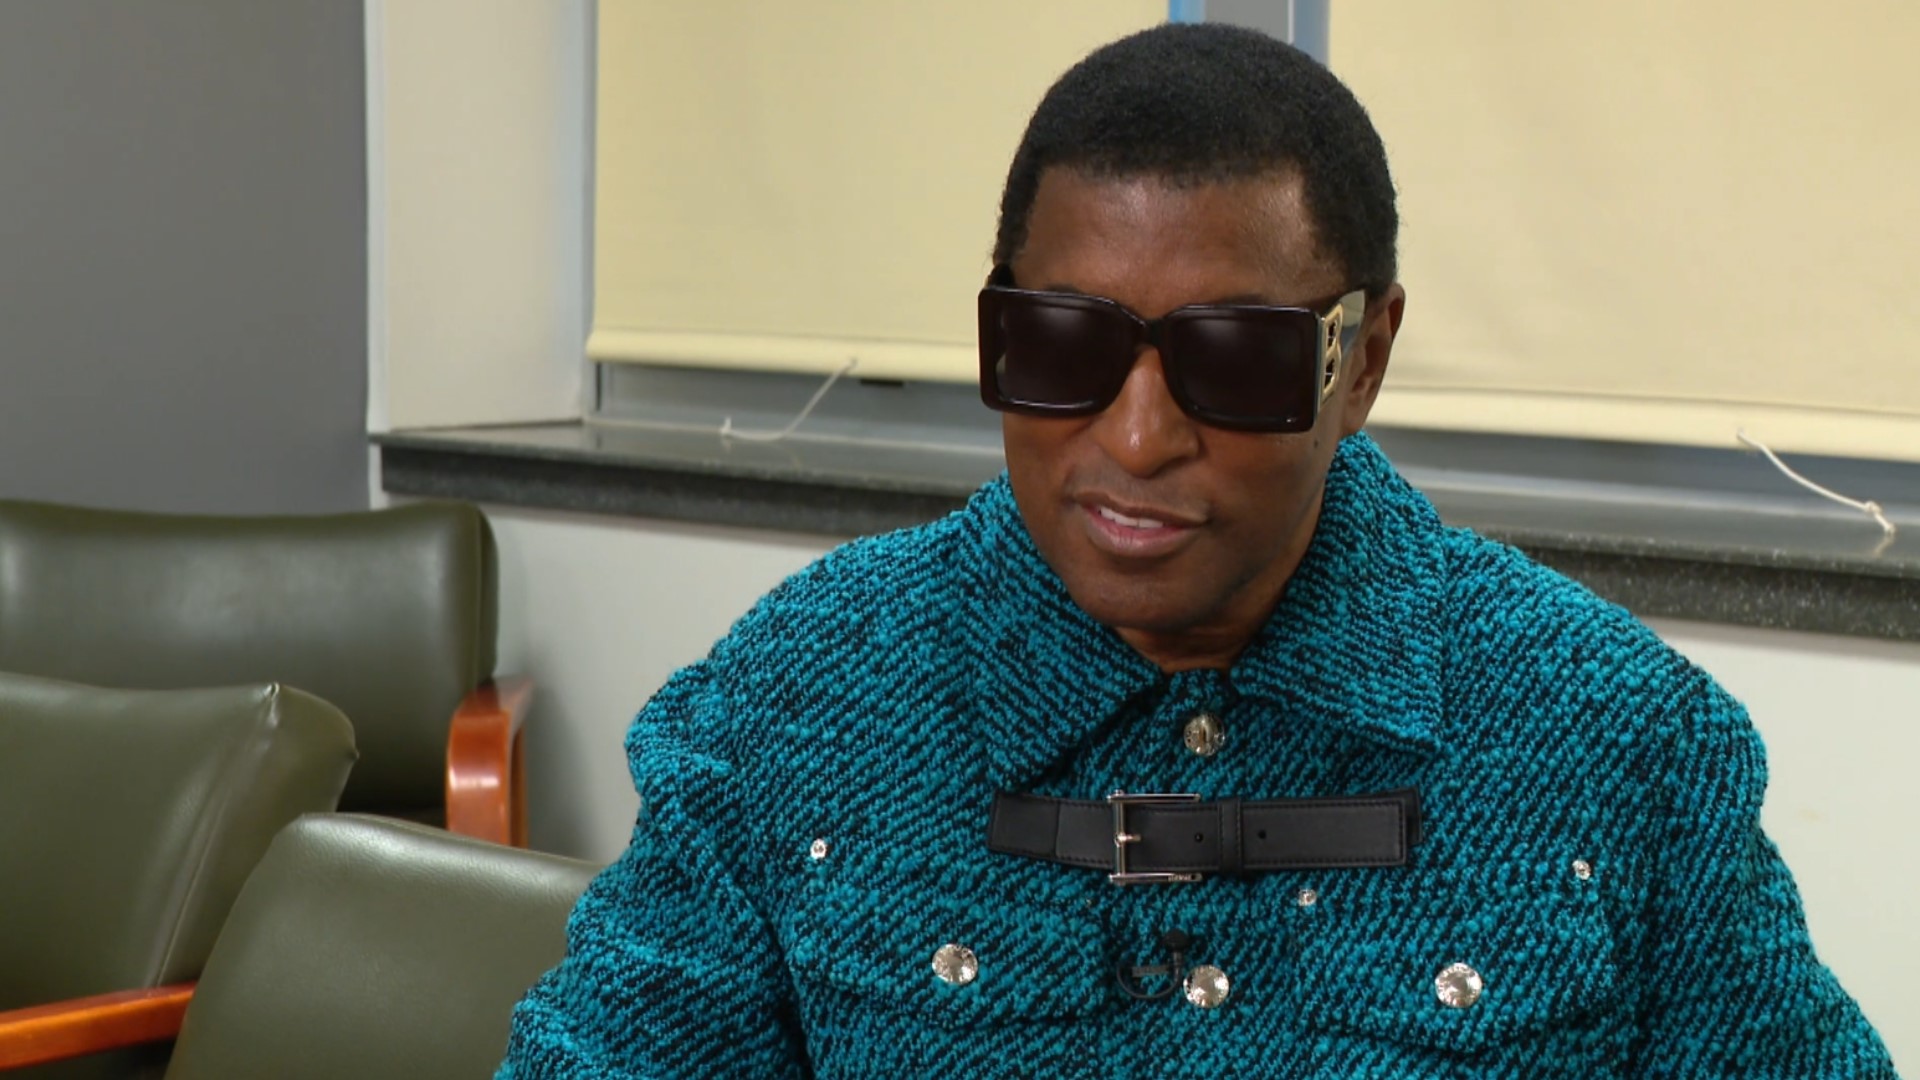 13News reporter Emily Longnecker interviews Indianapolis native and music icon Babyface, who returned to his hometown for NBA All-Star Weekend.